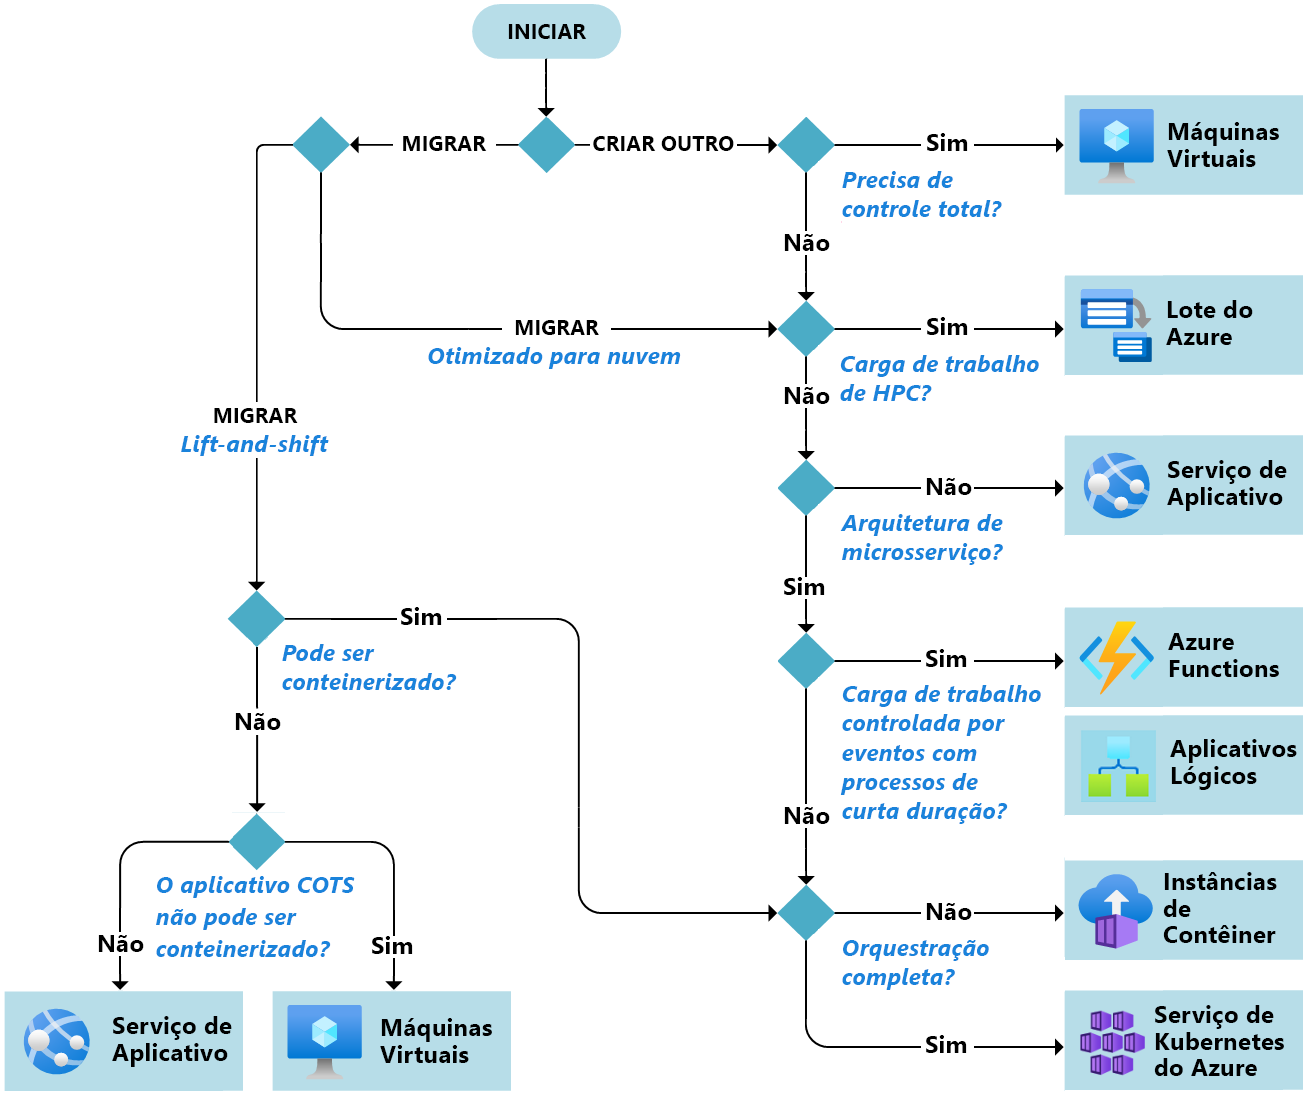 Flowchat that shows considerations and options for Azure compute solutions.